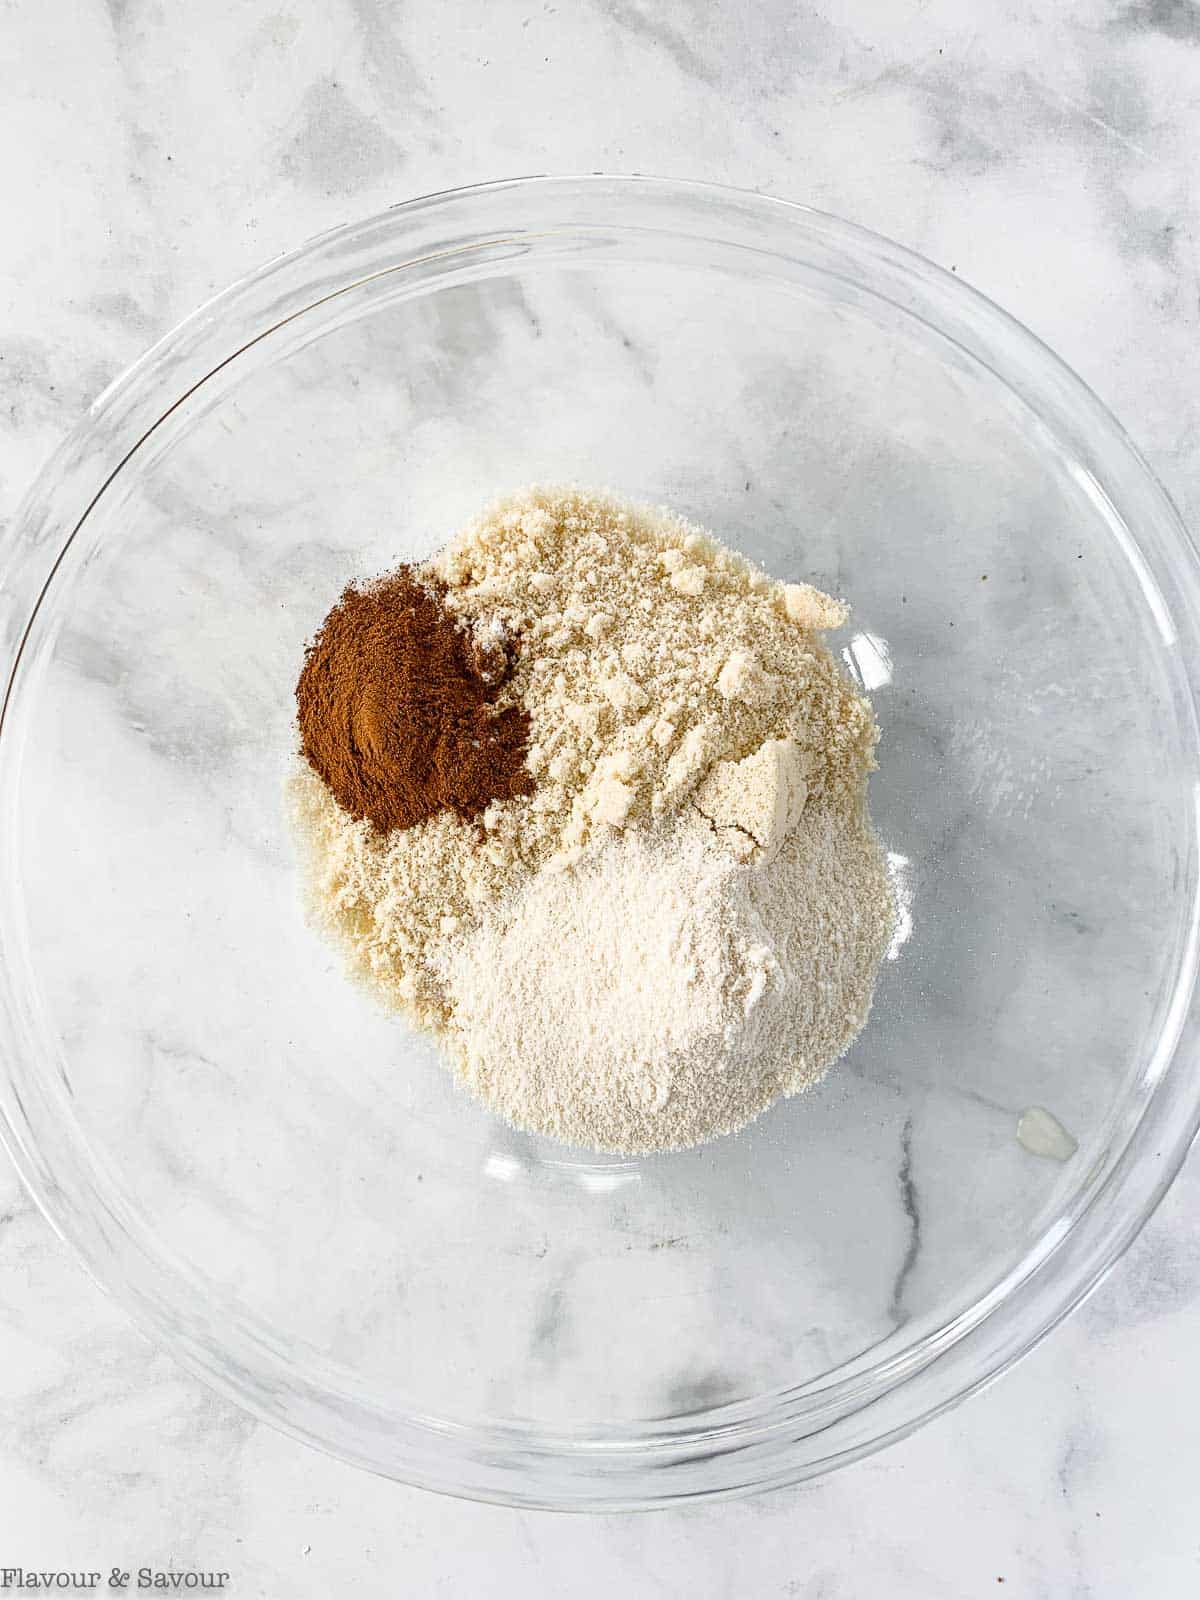 Combine dry ingredients in a bowl.